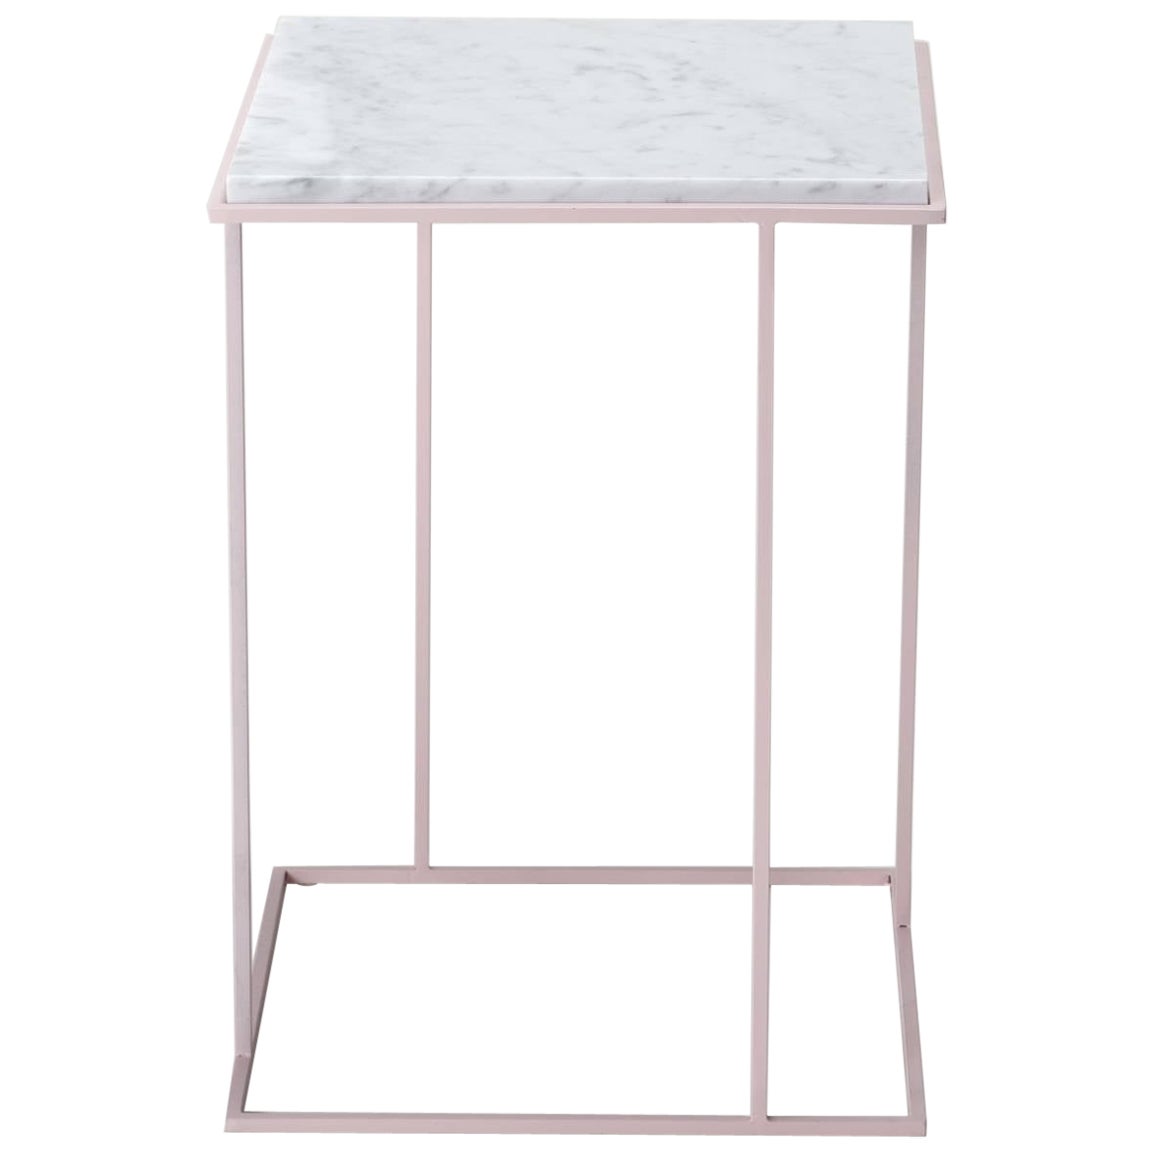 Frame - Carrara Marble Side Table By DFdesignlab Handmade in Italy For Sale